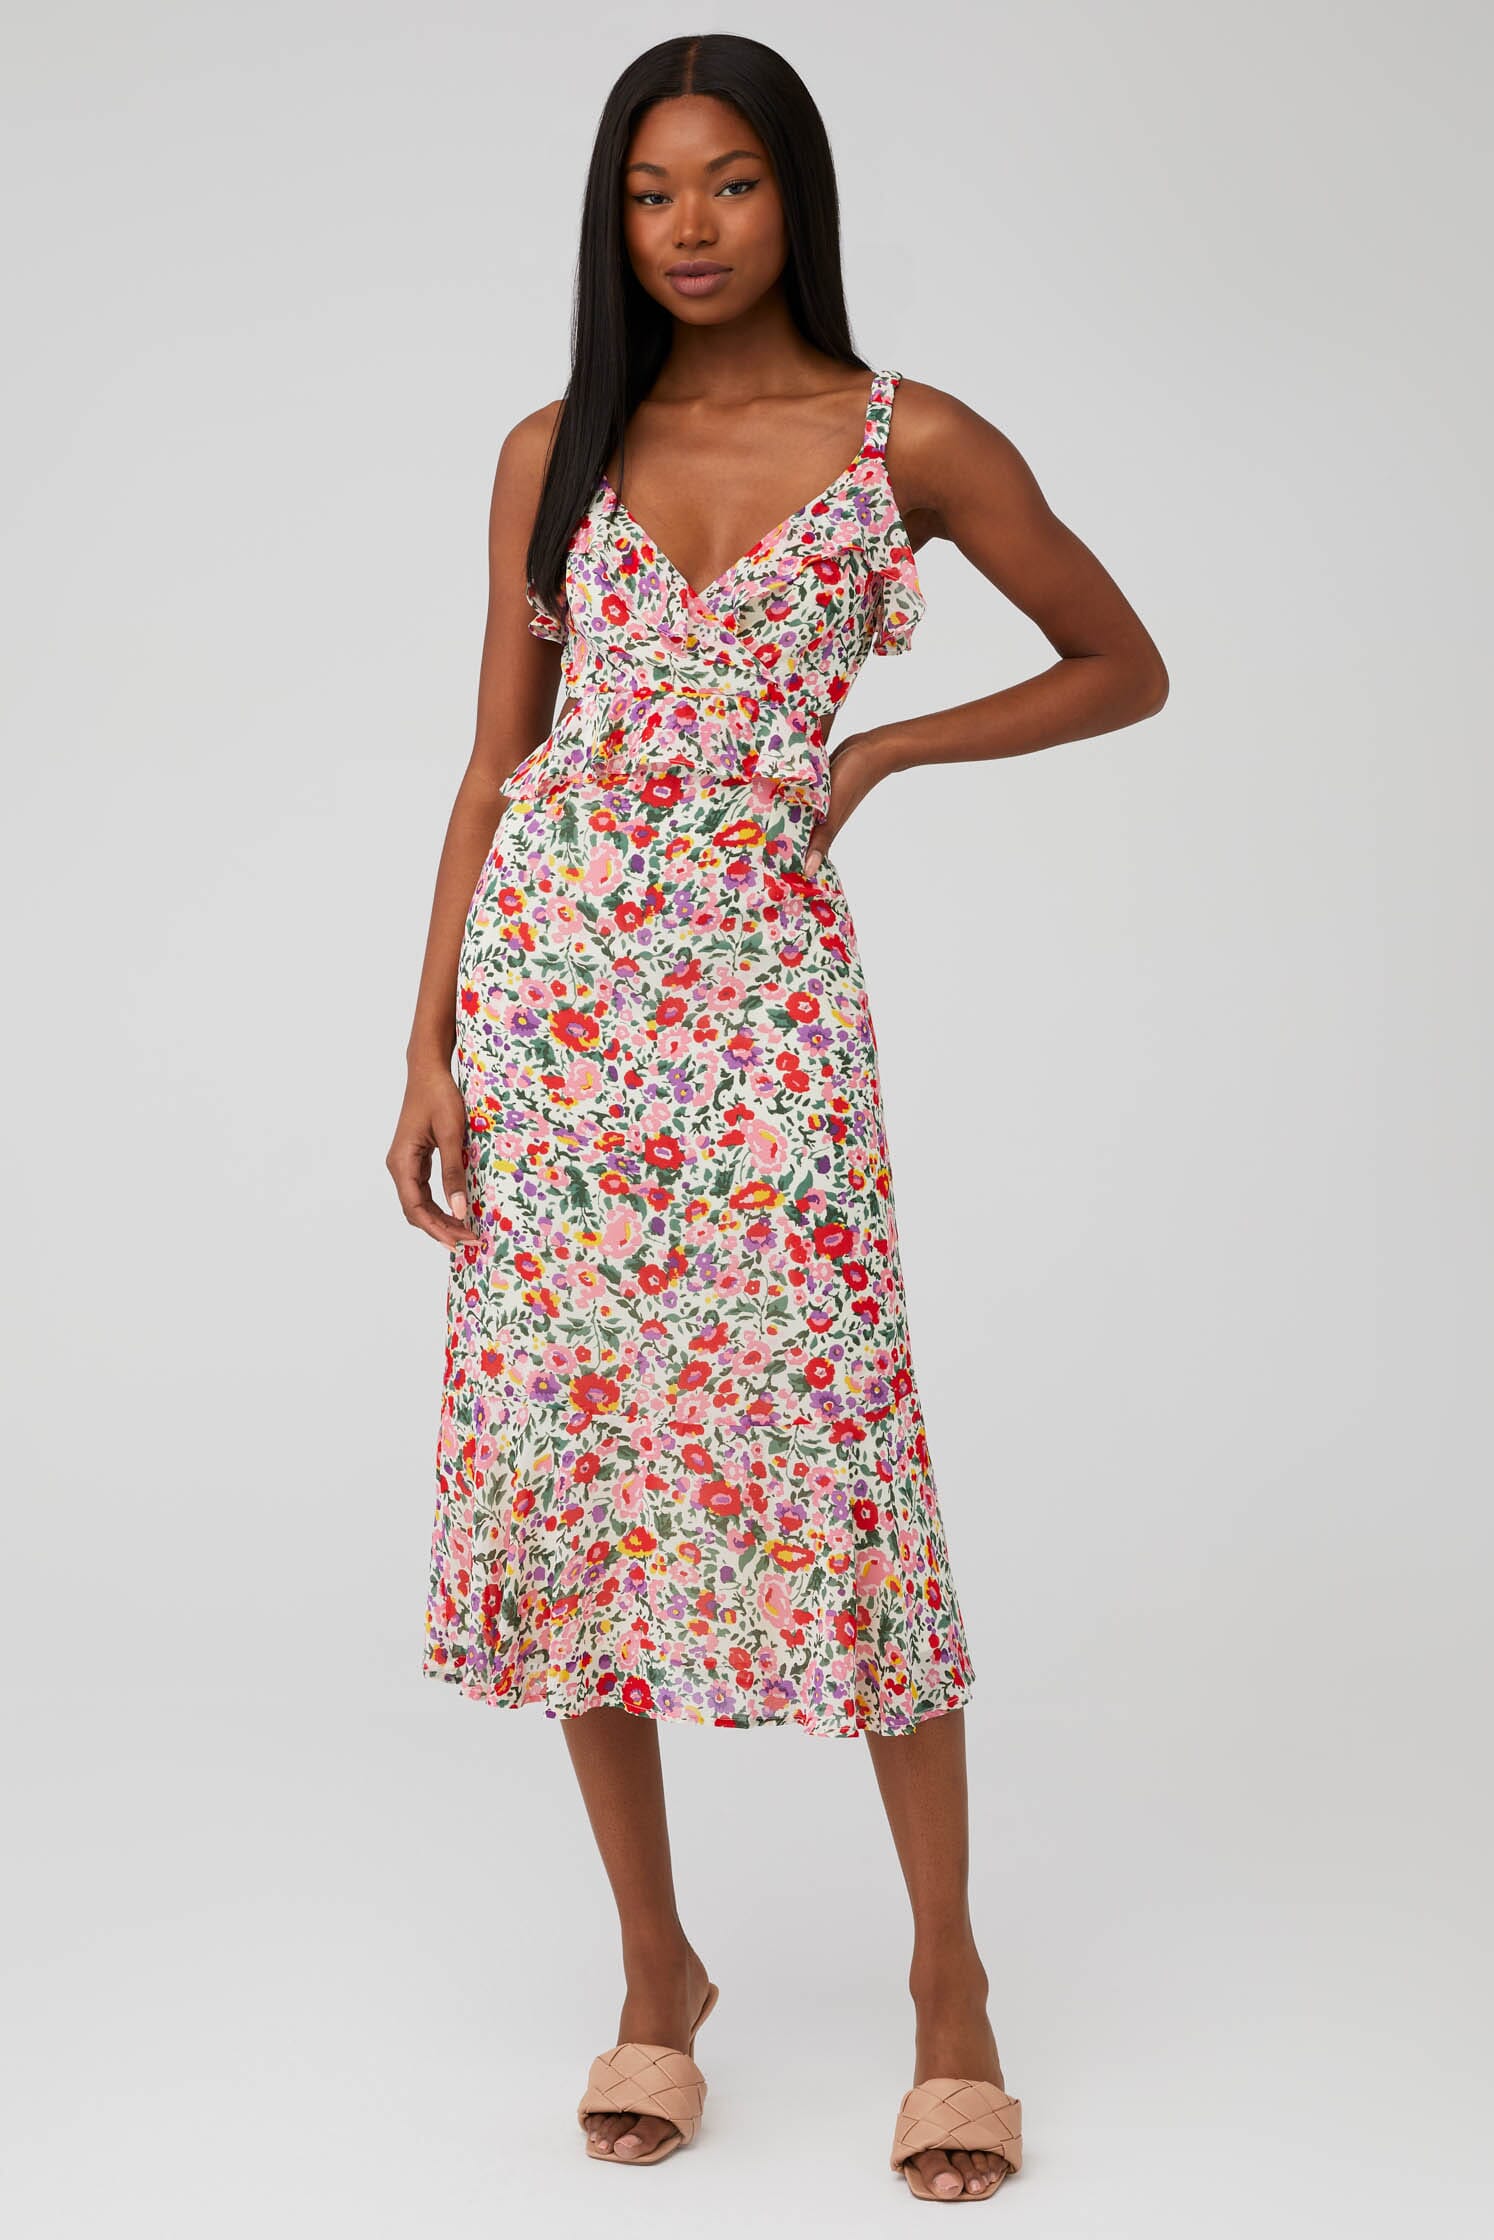 ASTR | Wildflower Dress in Pink Red Floral| FashionPass